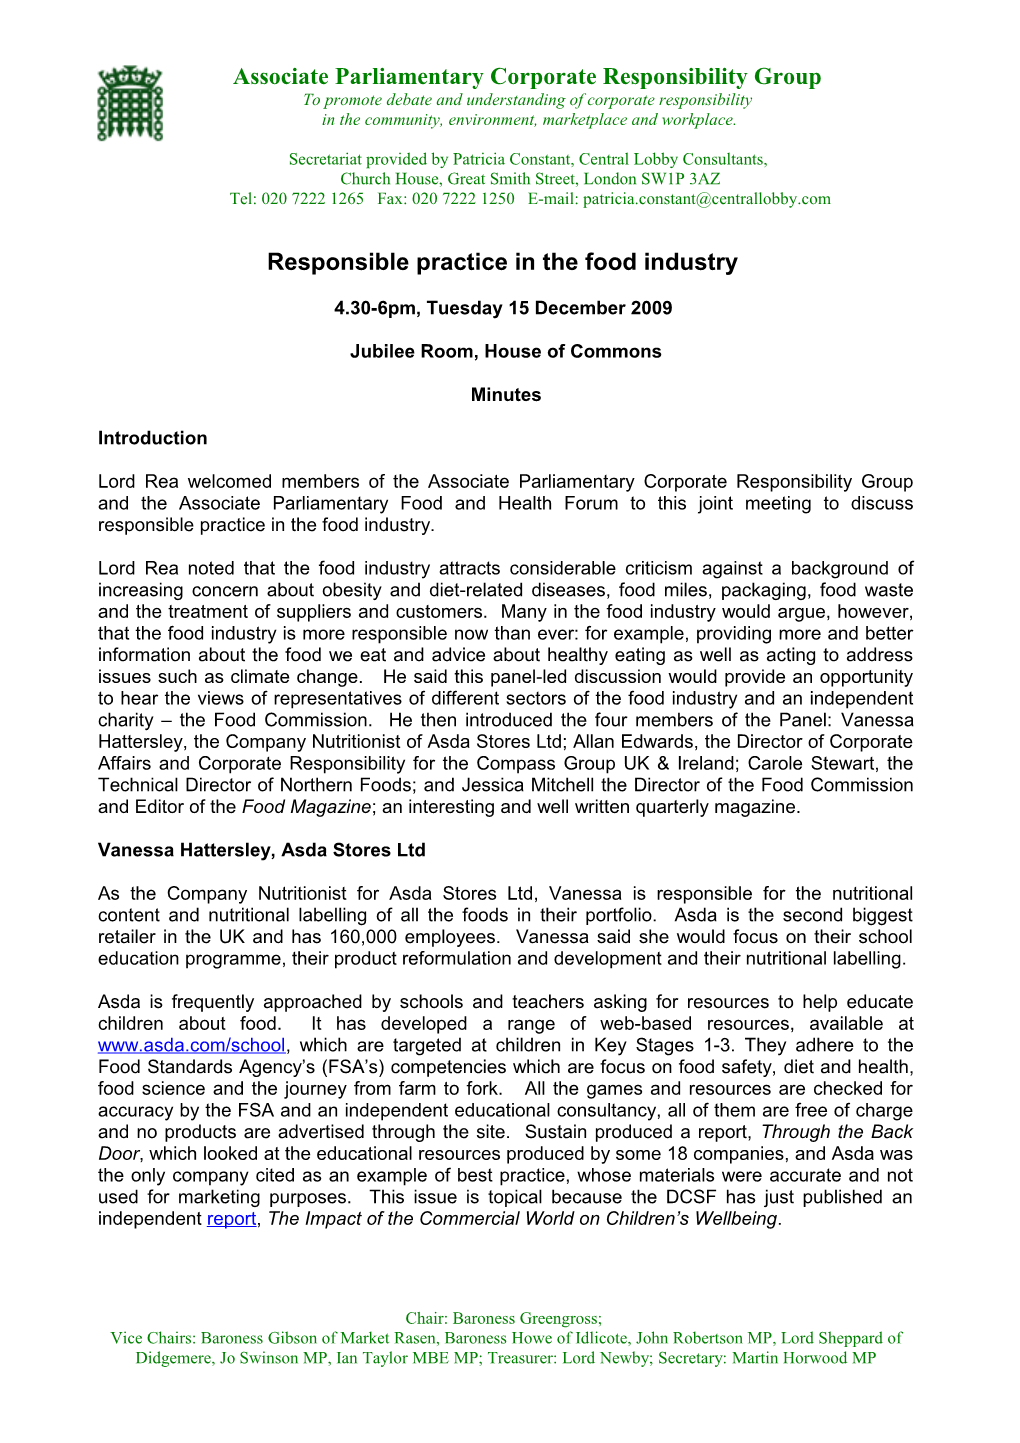 Responsible Practice in the Food Industry